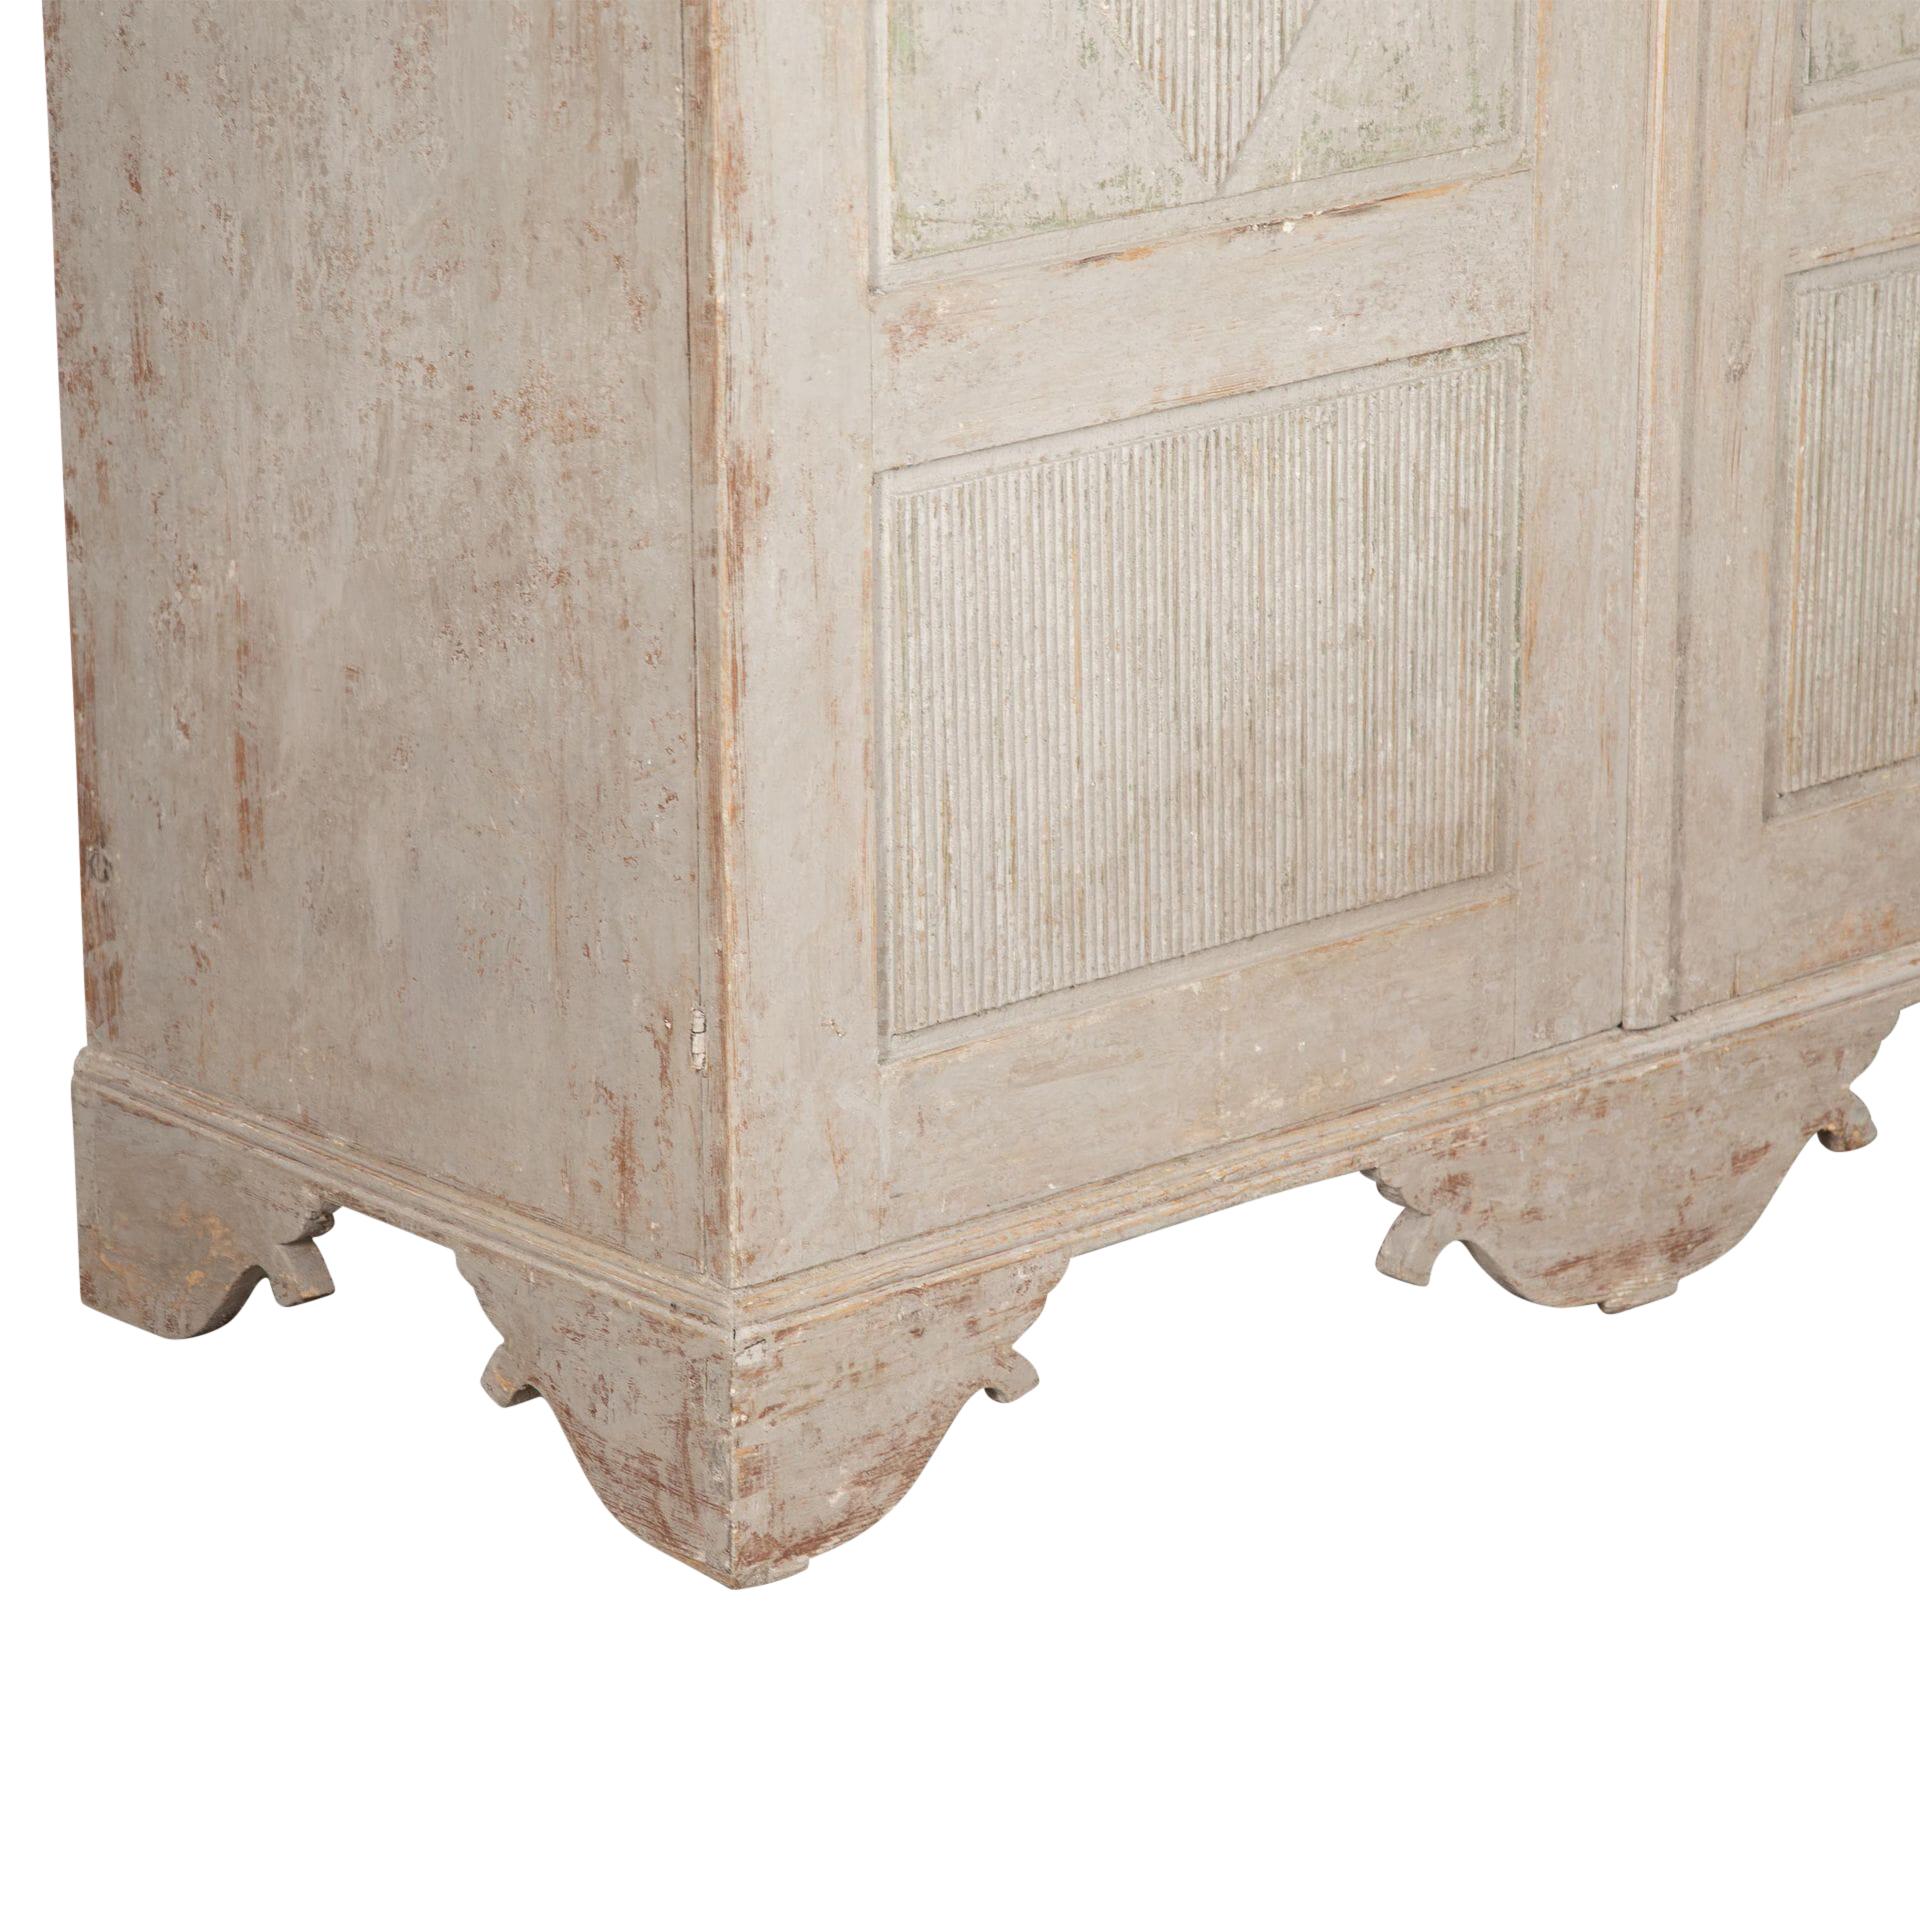 19th Century Swedish Gustavian Cabinet In Good Condition For Sale In Tetbury, Gloucestershire